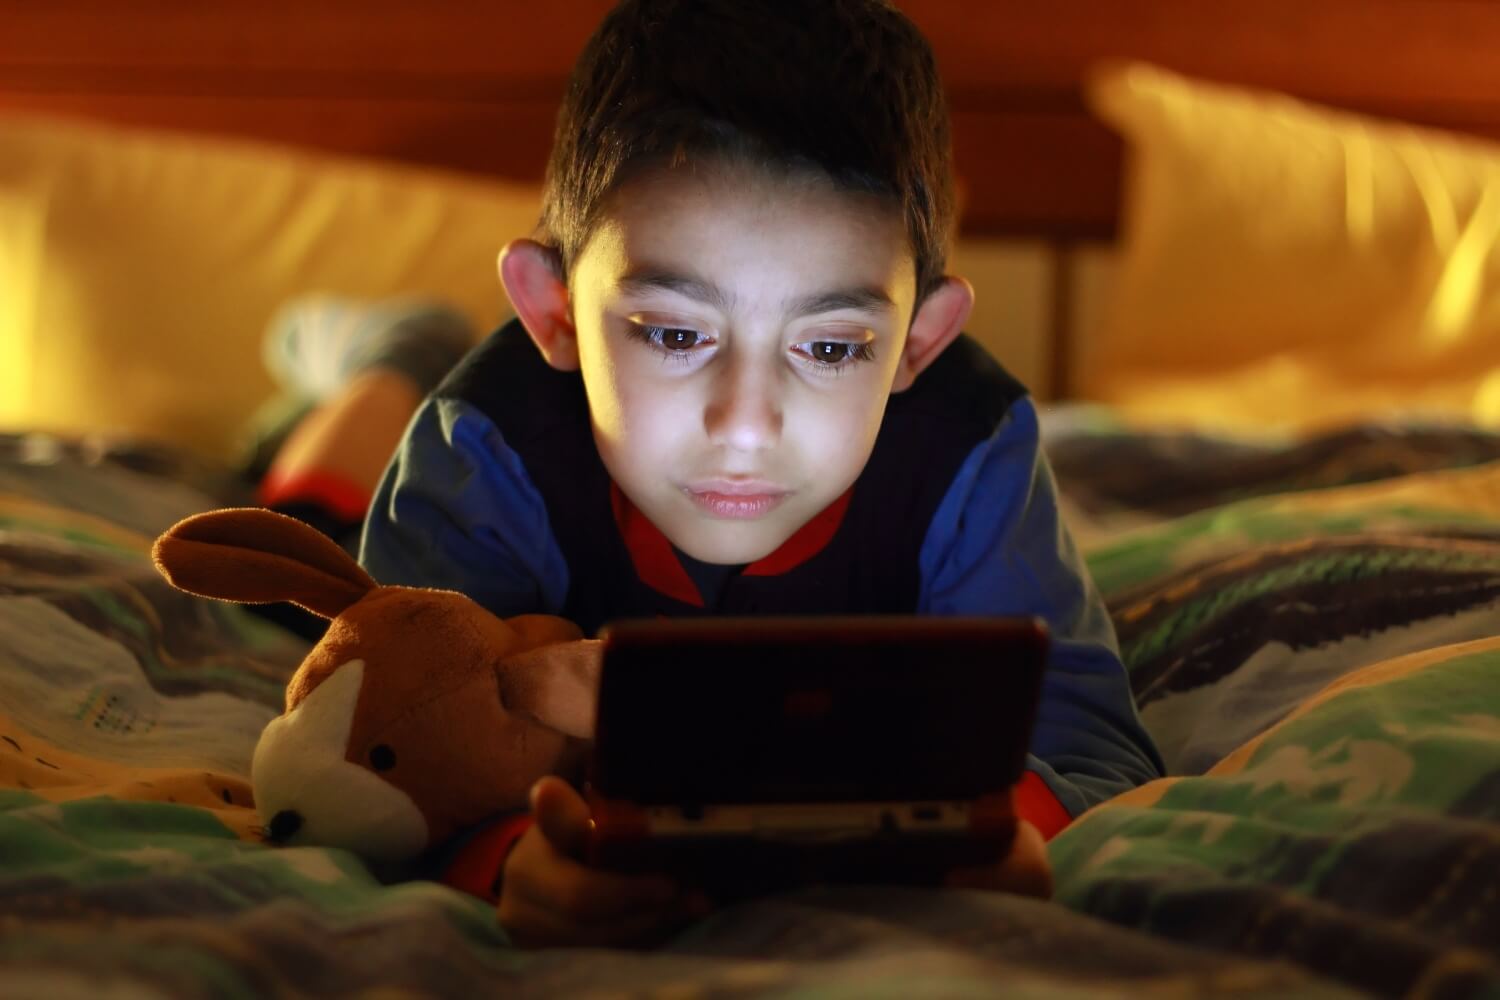 The FDA has approved a video game to treat children with ADHD